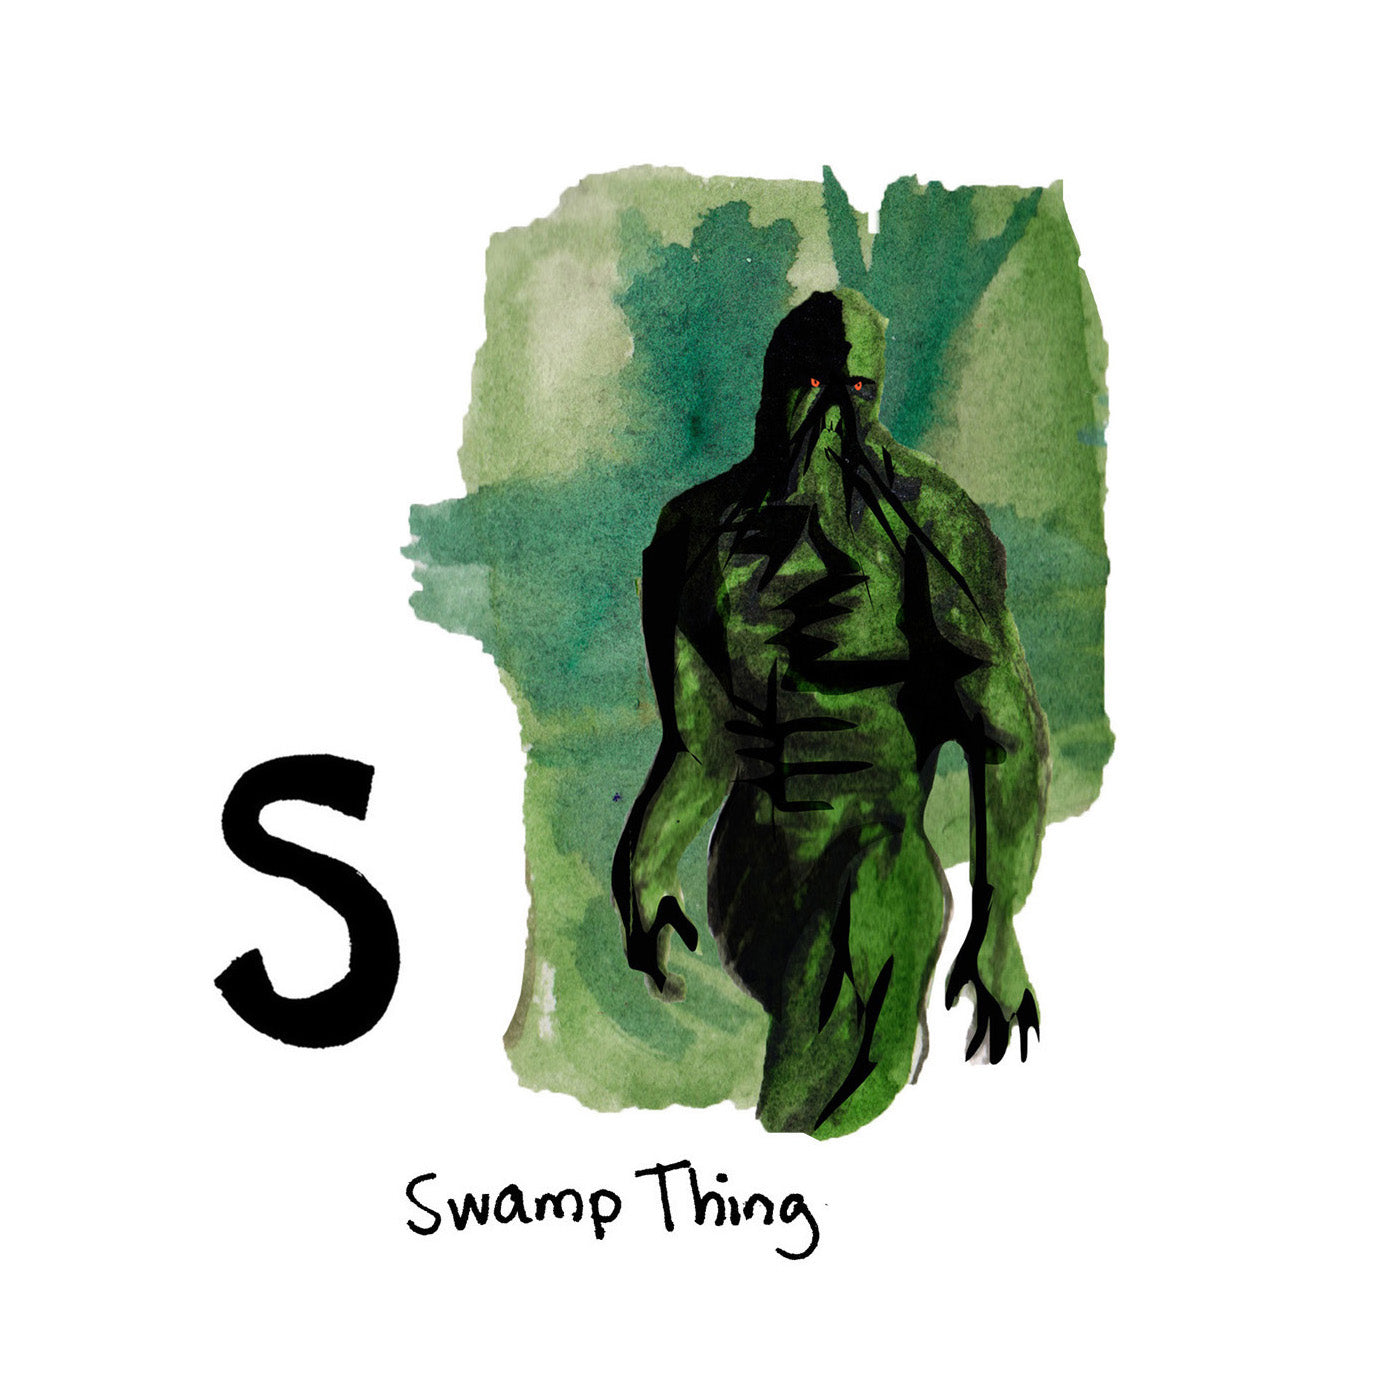 S is for Swamp Thing. The Wes Craven movie, Swamp Thing, was filmed entirely in Charleston in 1982.